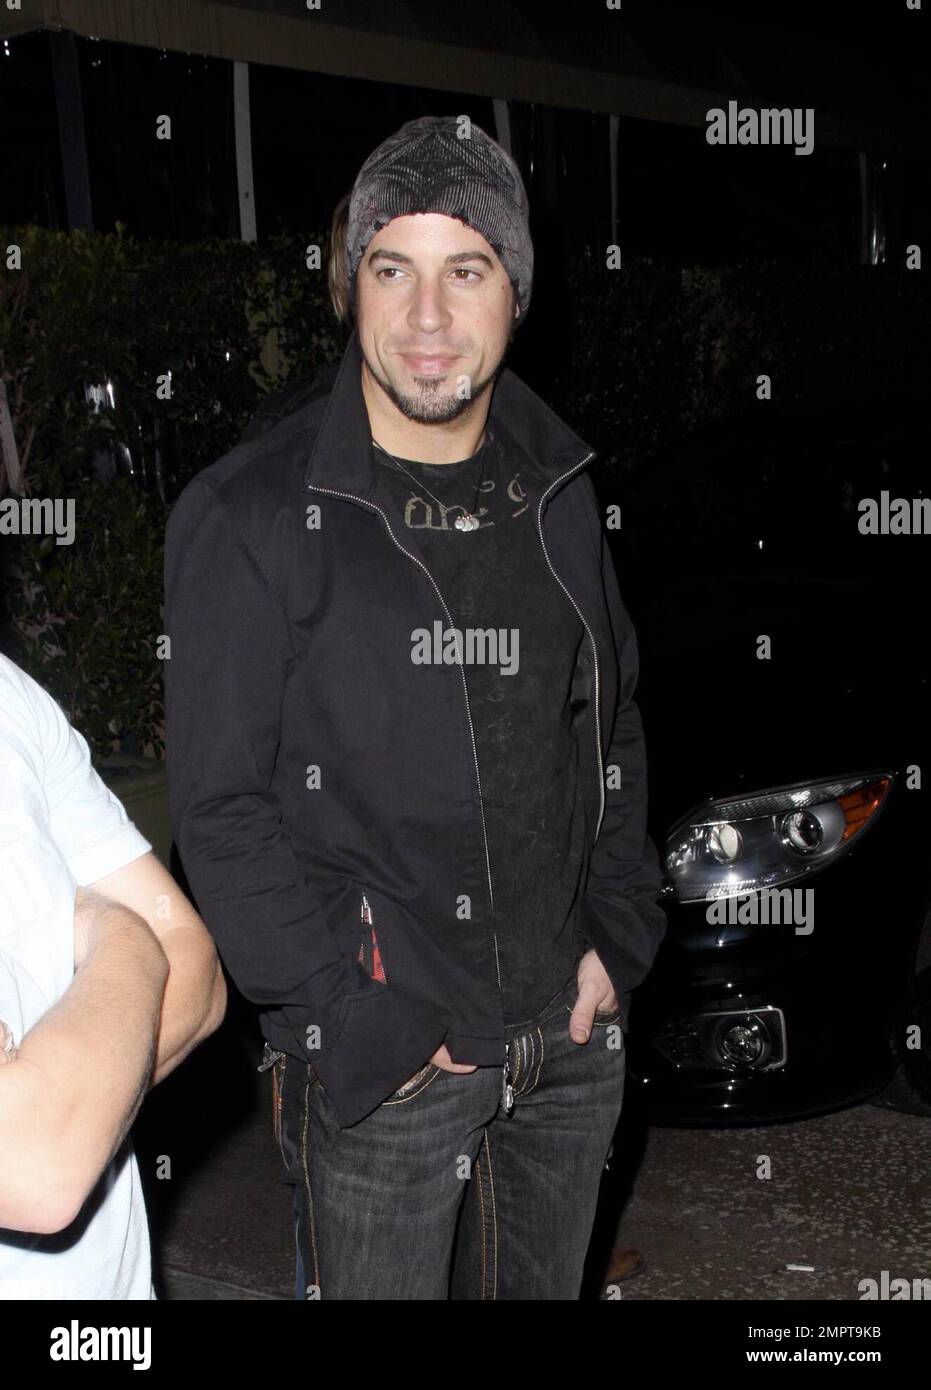 Exclusive!! Rocker and former 'American Idol' contestant Chris Daughtry leaves the restaurant Ago with a group of friends. When asked who he plans to vote for, he replied 'Chuck Norris.' Los Angeles, CA. 10/5/08. Stock Photo